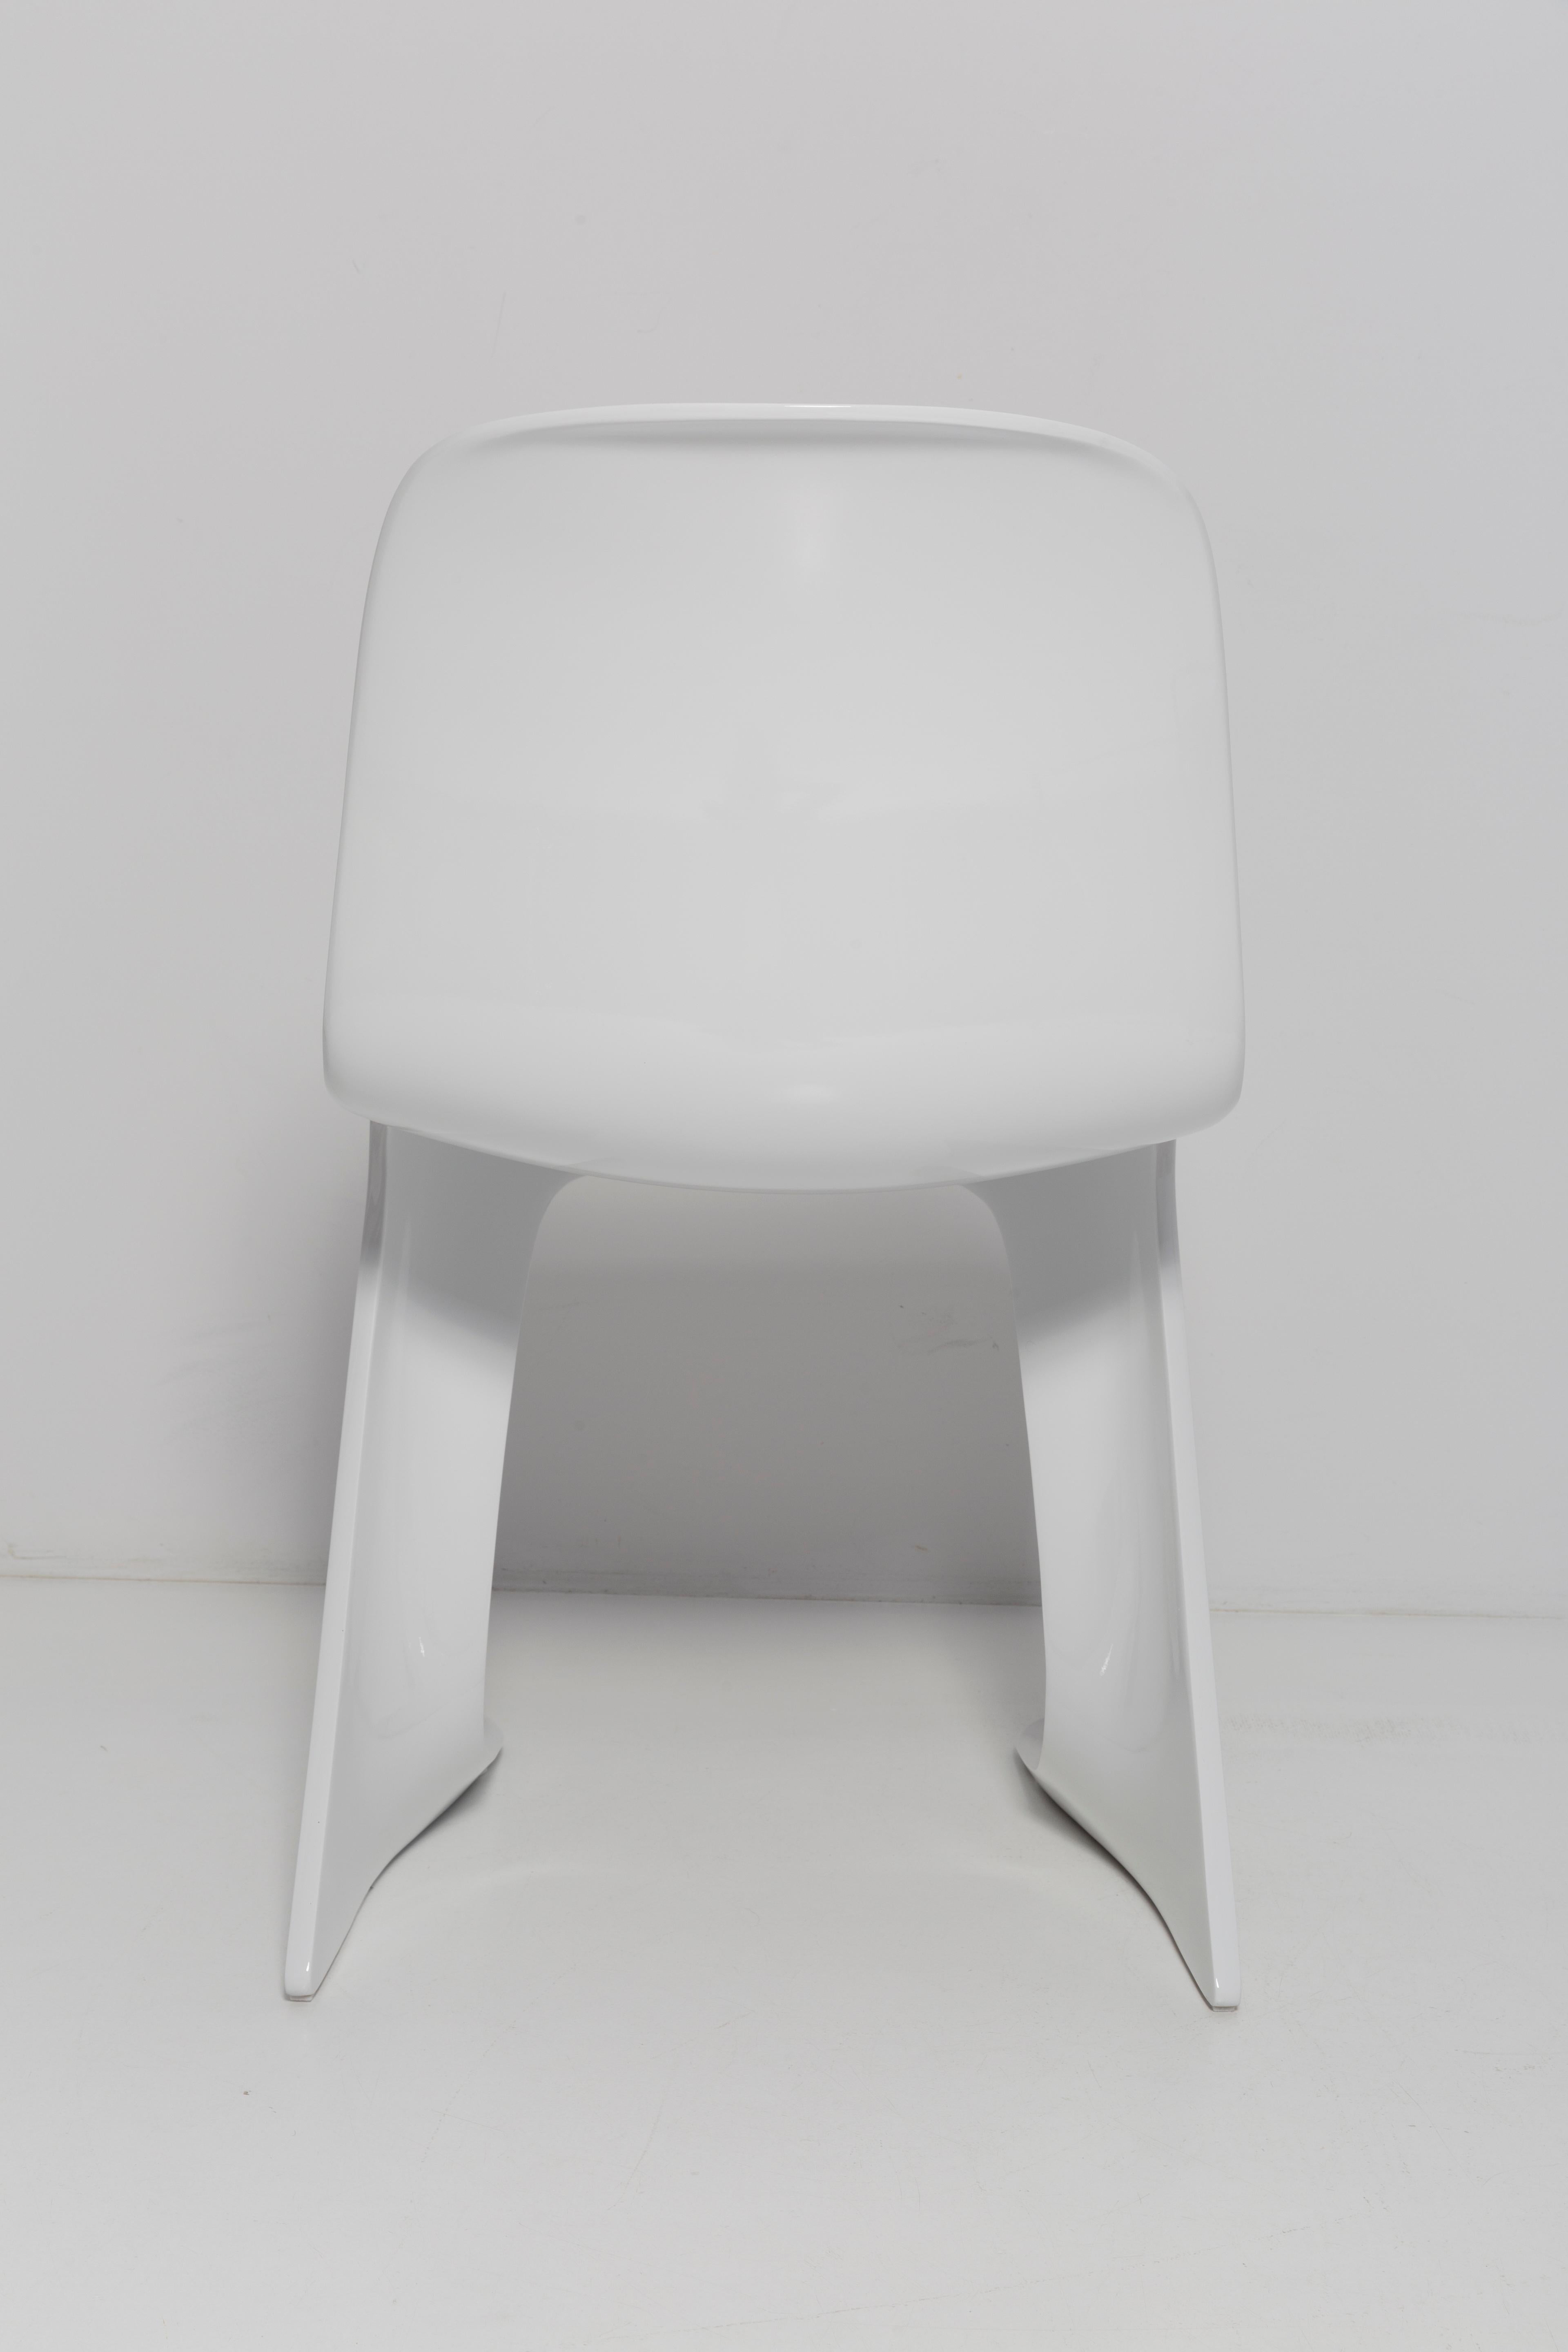 White Glossy Kangaroo Chair Designed by Ernst Moeckl, Germany, 1960s For Sale 2